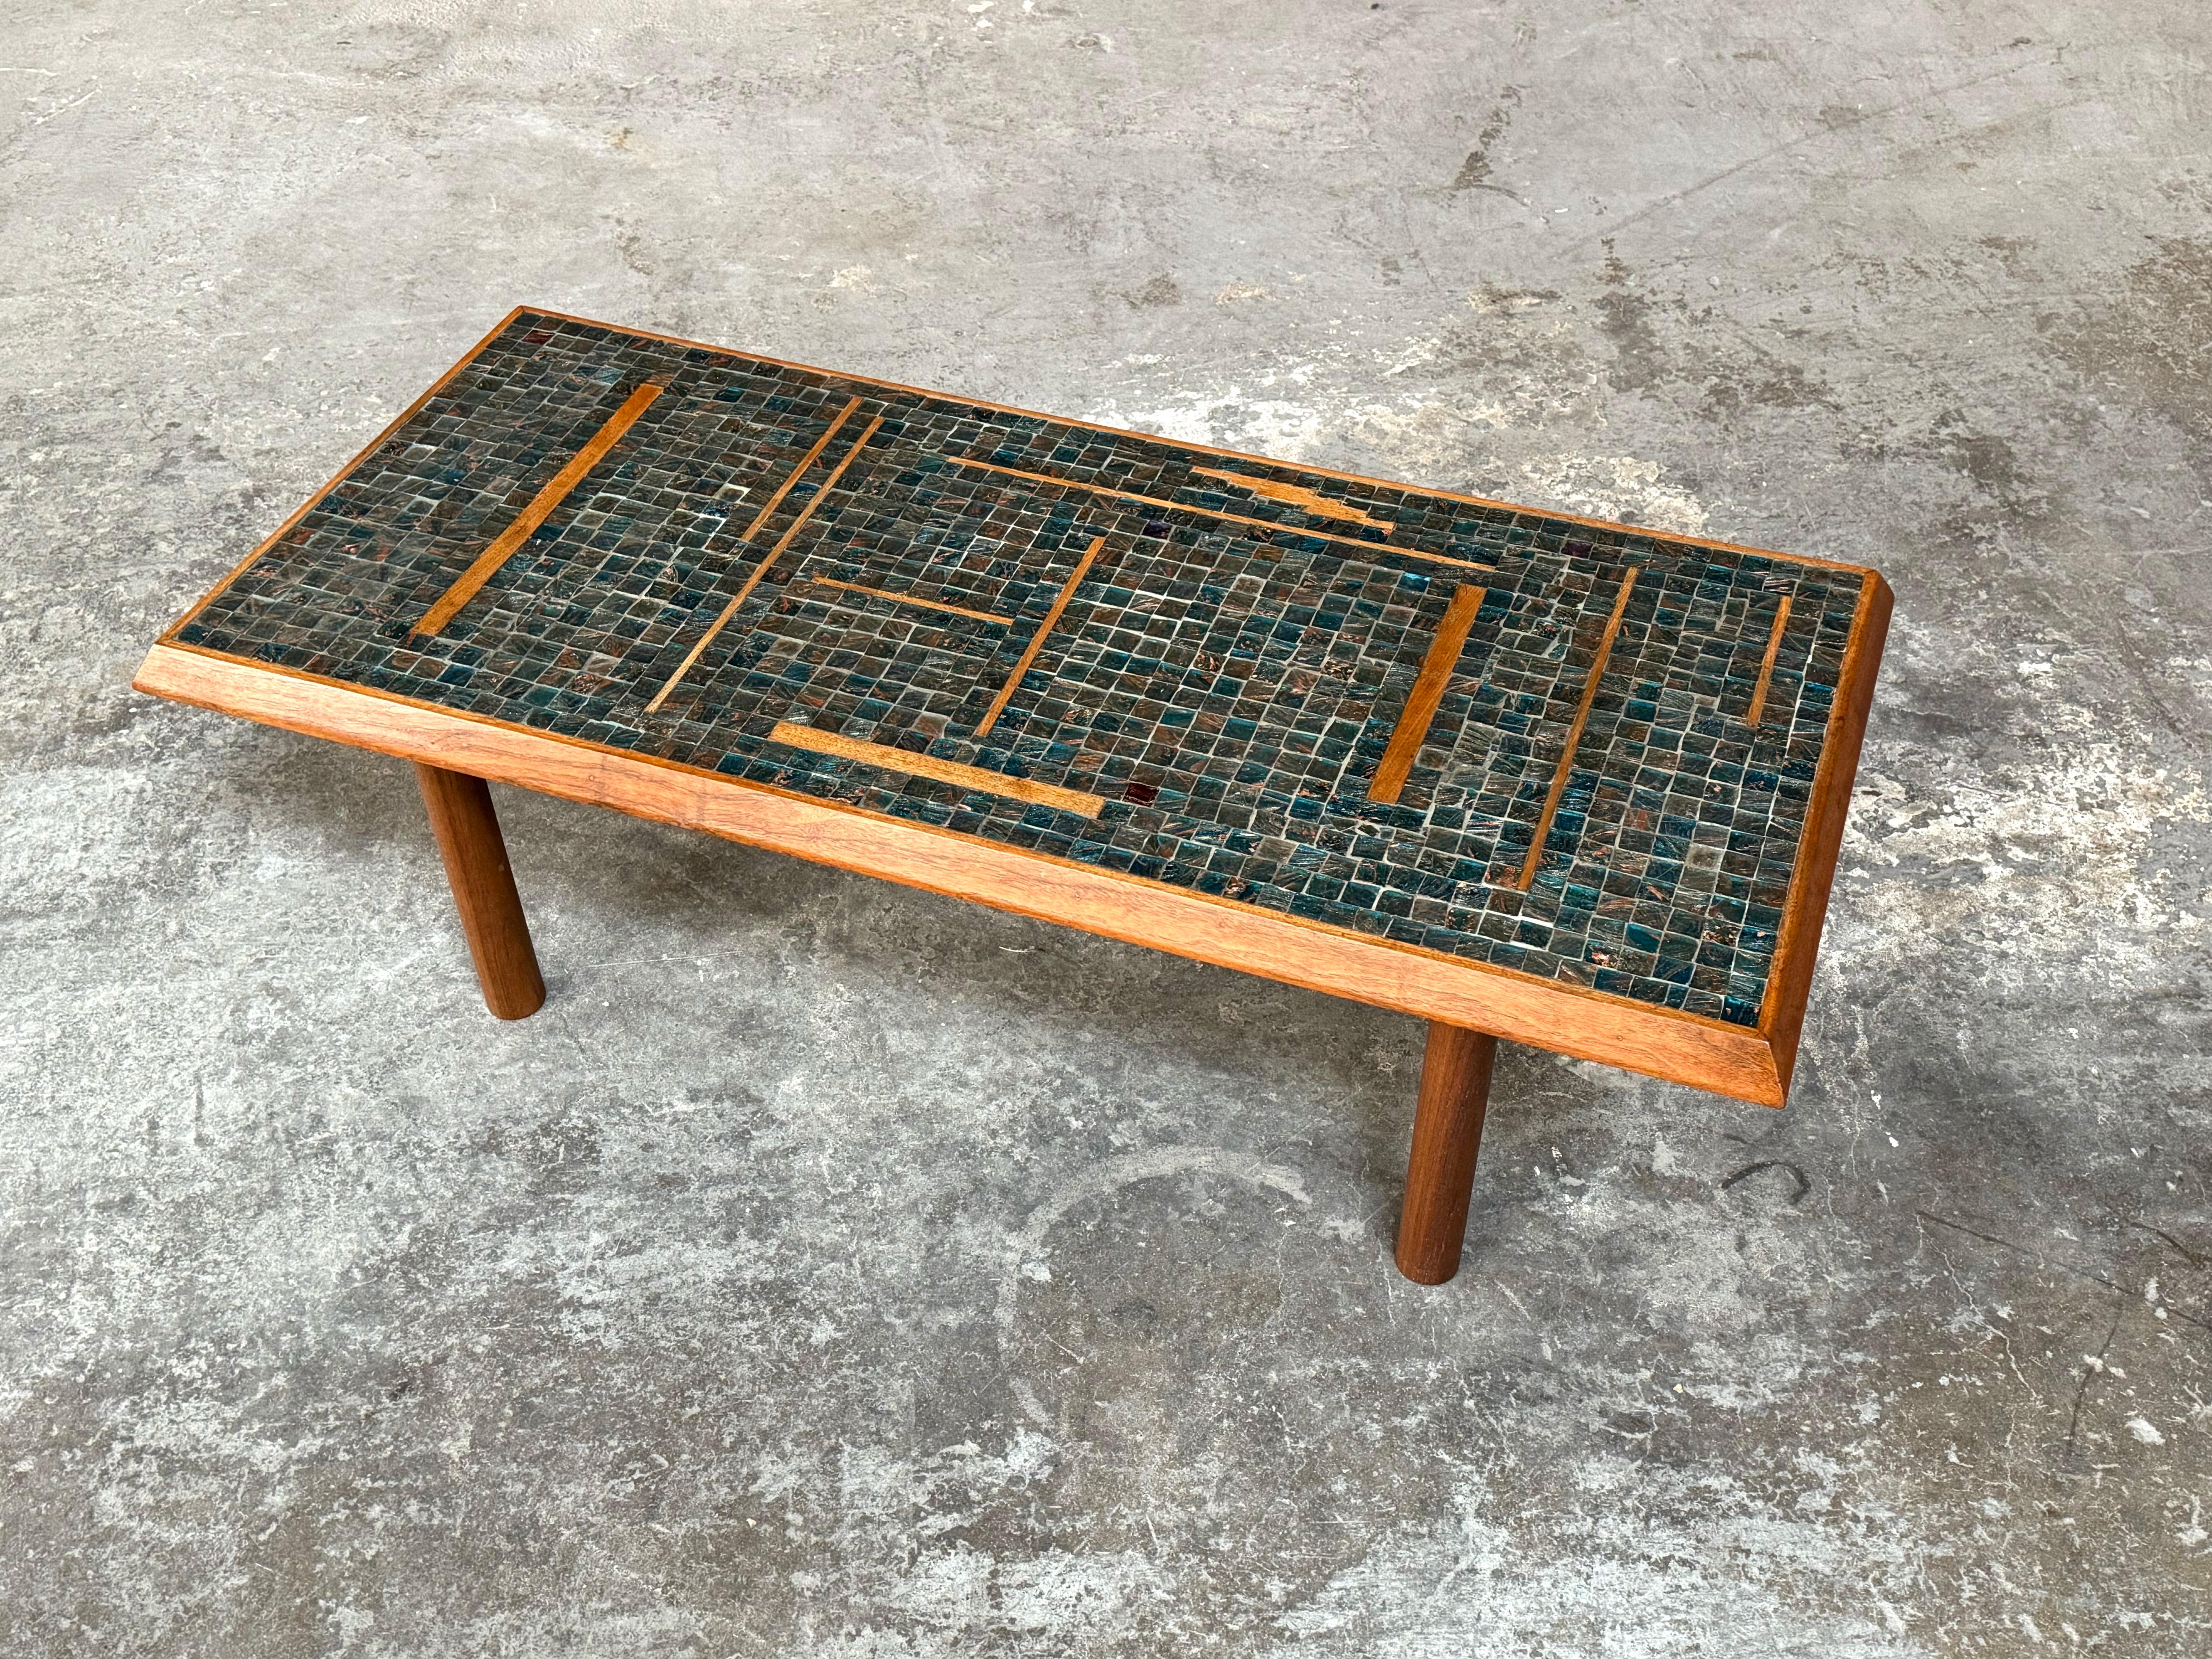 Handmade glass tile mosaic coffee table with walnut inlay and edge trim. A compact size coffee table with earth tone colored tiles in browns and blues with an abstract / geometric pattern walnut inlay, the table legs are a cylindrical walnut. The